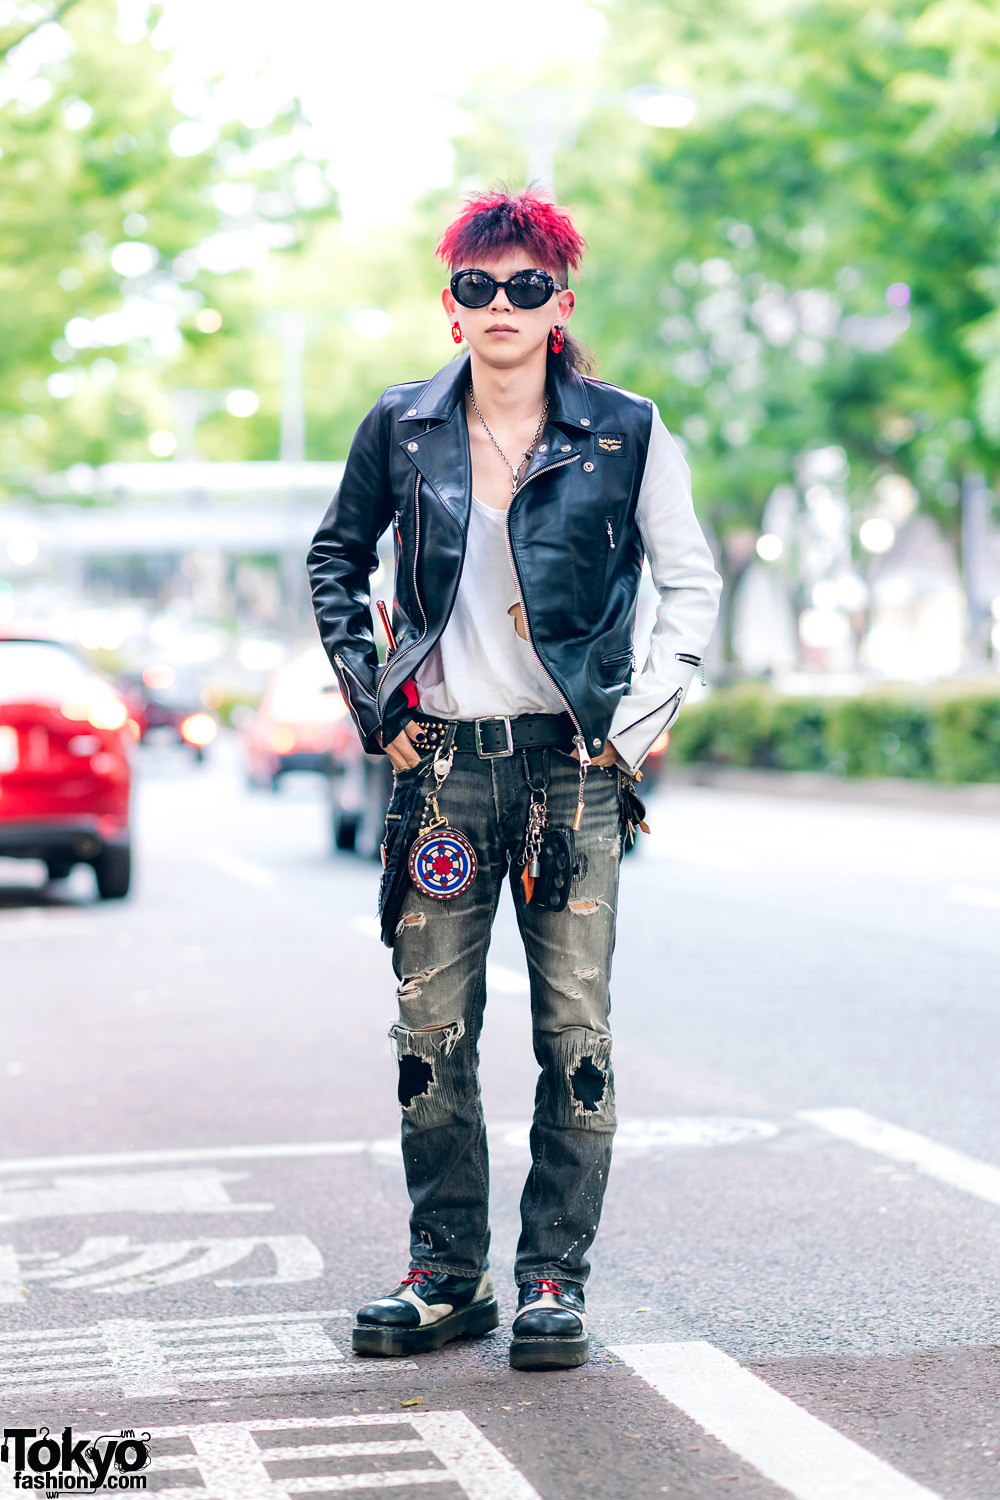 Edgy Monochrome Streetwear Style w/ Pink Hair, Skull Necklace, Lewis Leathers Motorcycle Jacket, Ripped Jeans, Denim Belt Bag & Two-Tone Boots